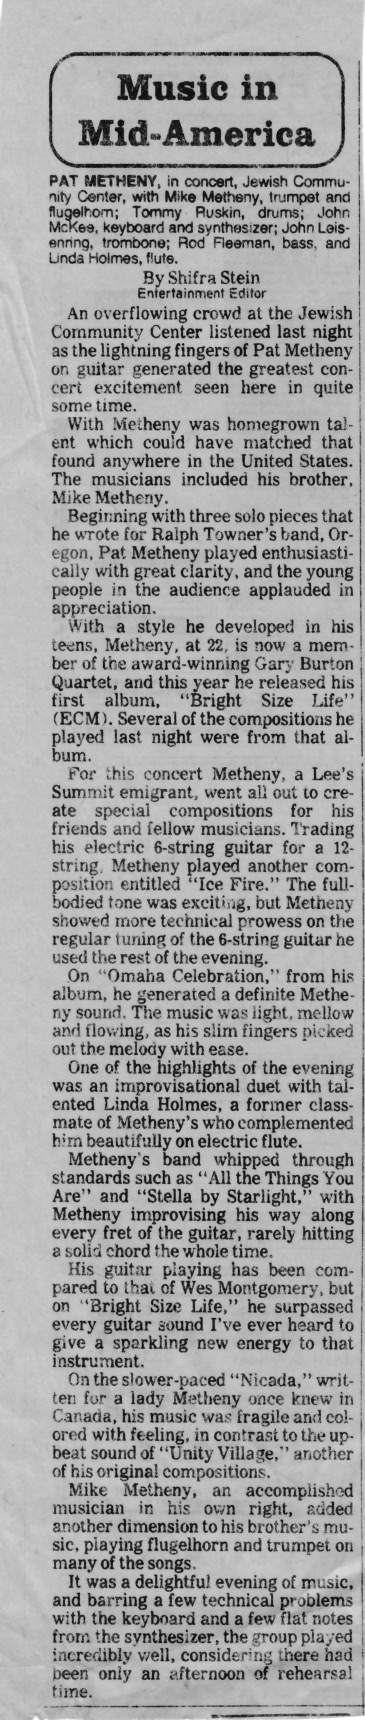 (Mostly) music related newspaper clippings from mid-70s-pat_metheny-jpeg